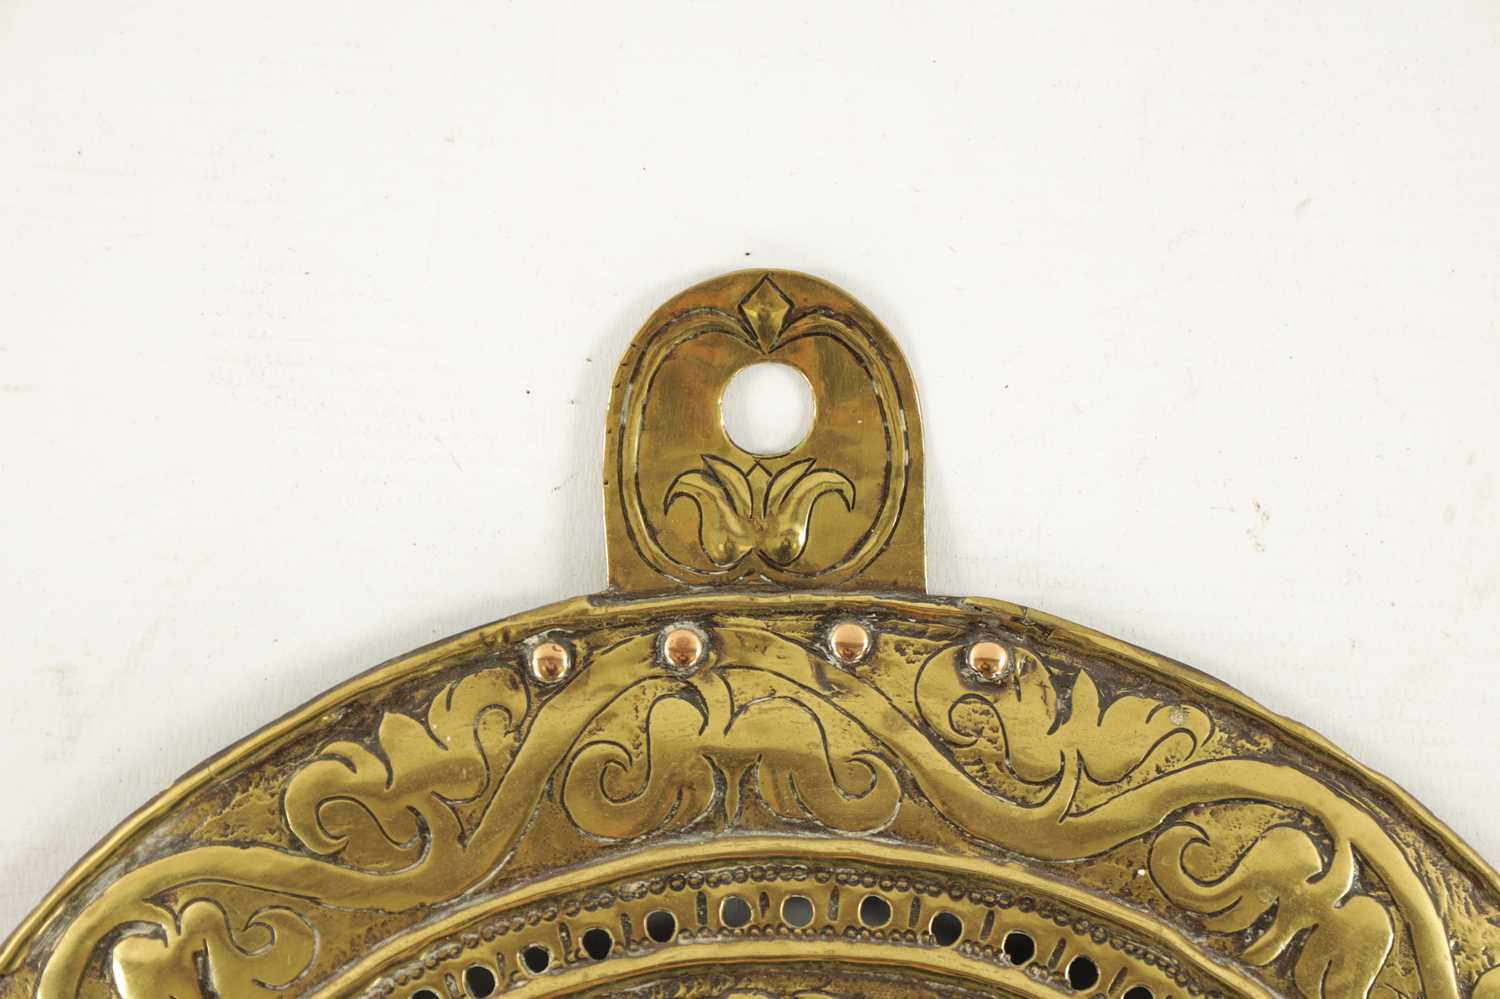 A LATE 17TH CENTURY ADAM & EVE EMBOSSED HANGING WALL LIGHT PLAQUE - Image 4 of 7